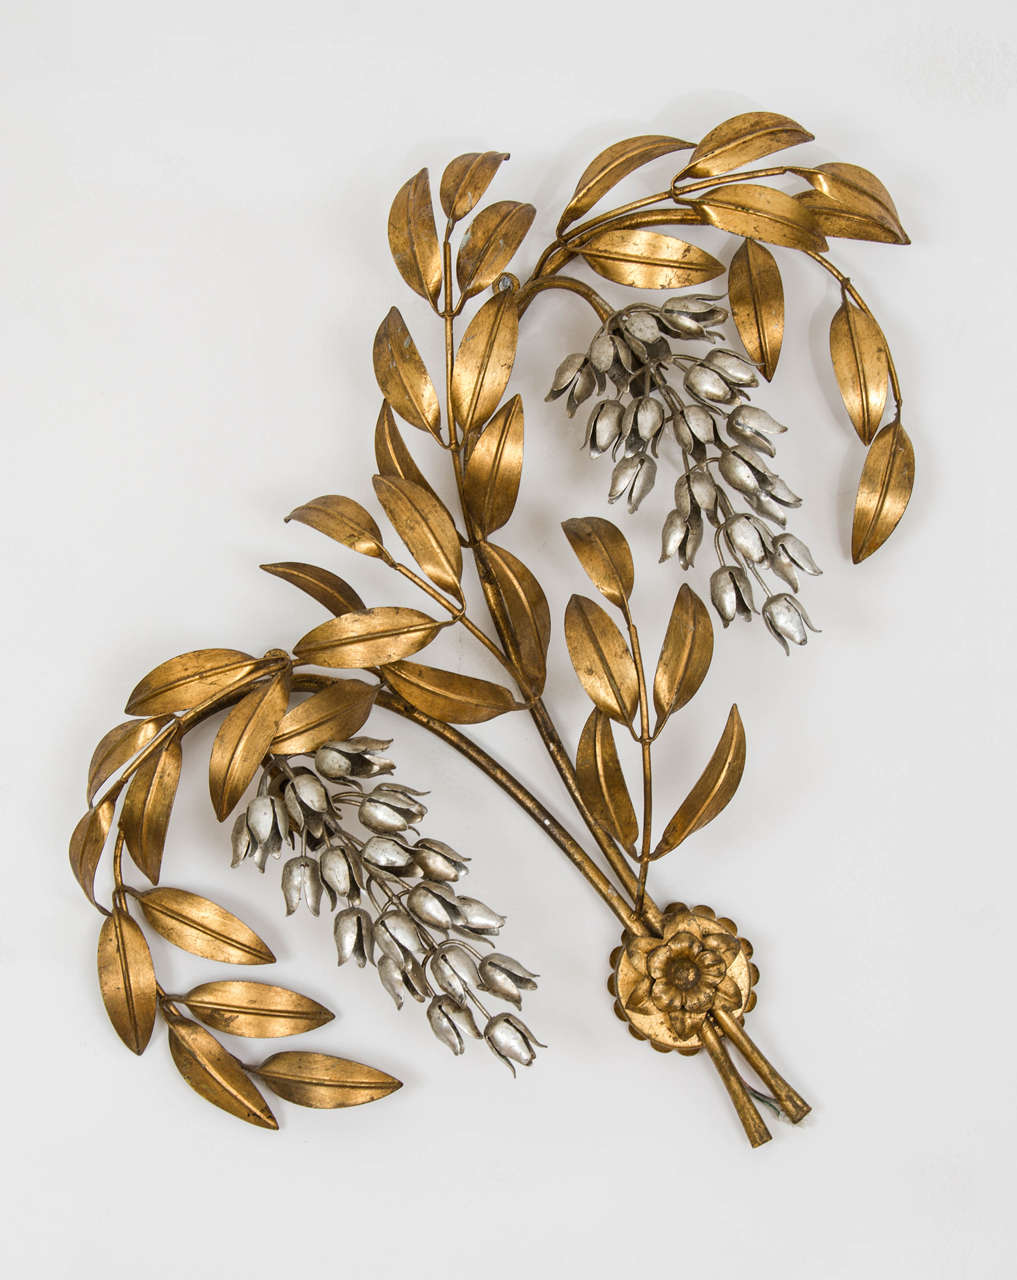 Stunning metal flower wall lights in two parts.
Large double spray with two-light fittings and smaller single spray of flowers with one light fitting.
Gilded gold metal leaves and silver trumpet shaped flowers.